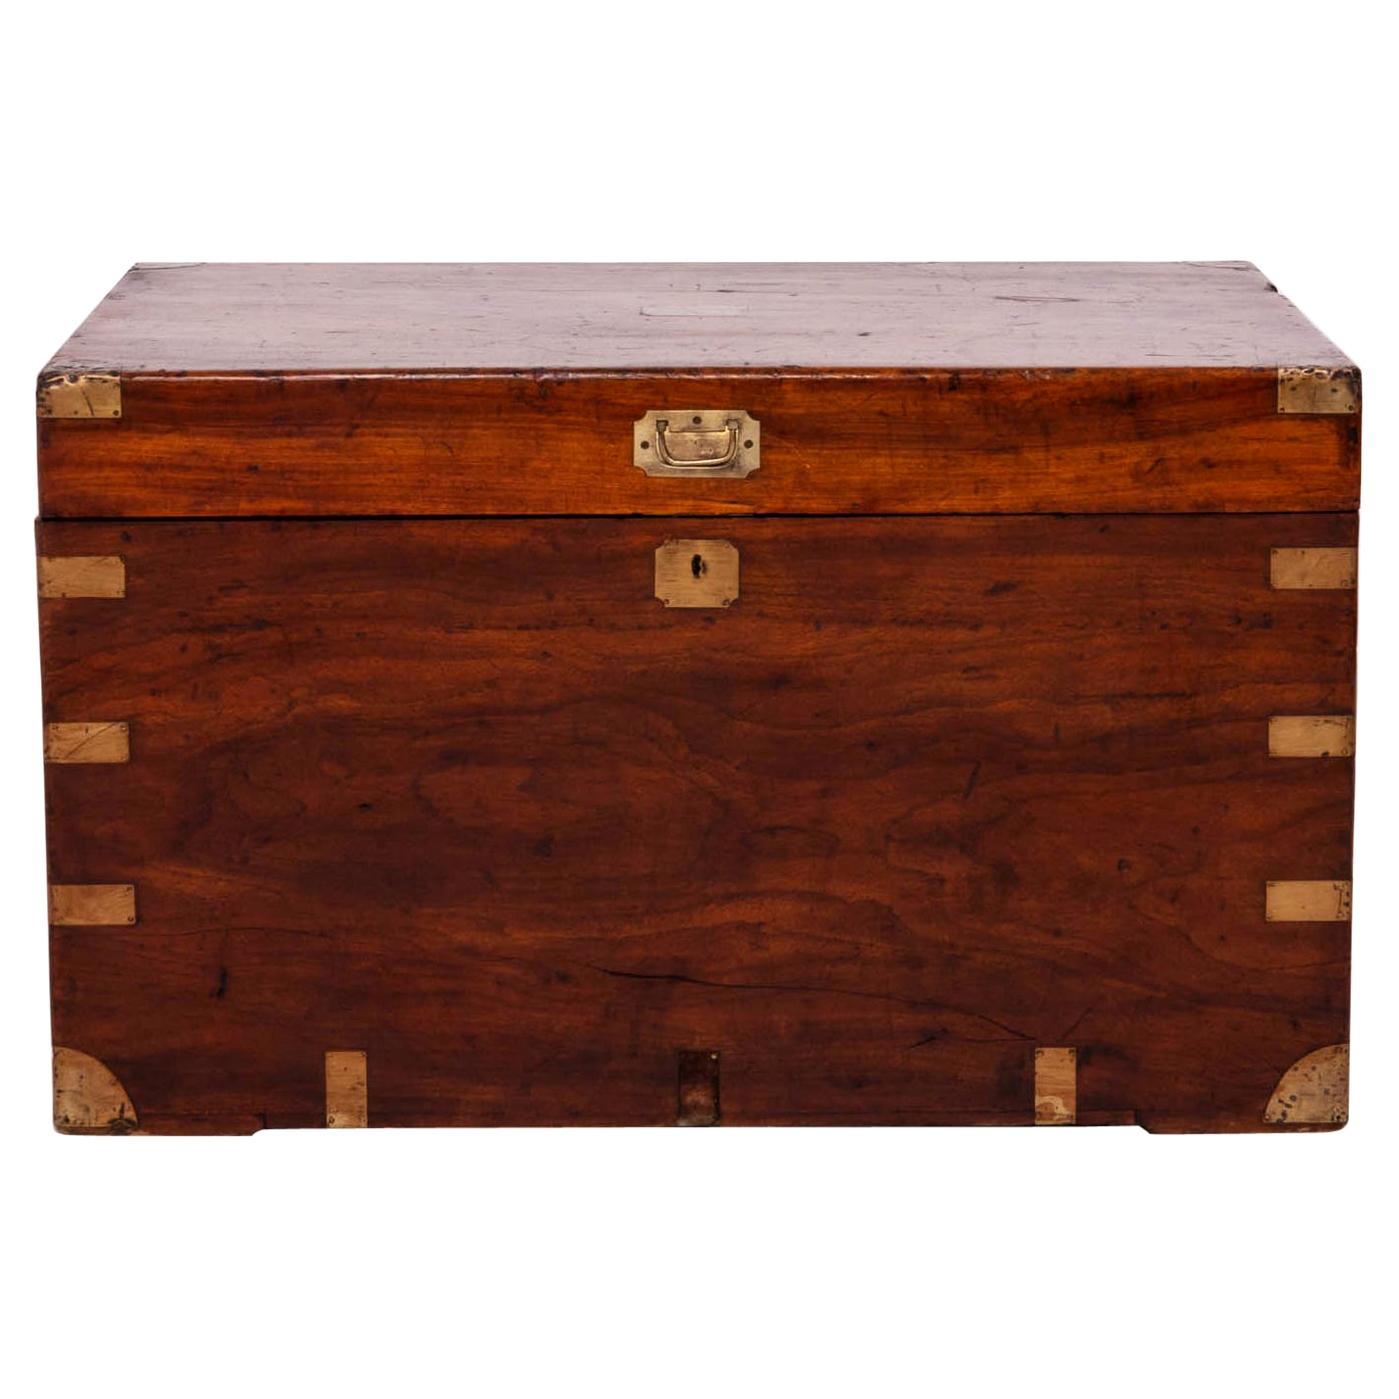 Late 19th Century Camphor Wooden Storage Chest, Hong Kong